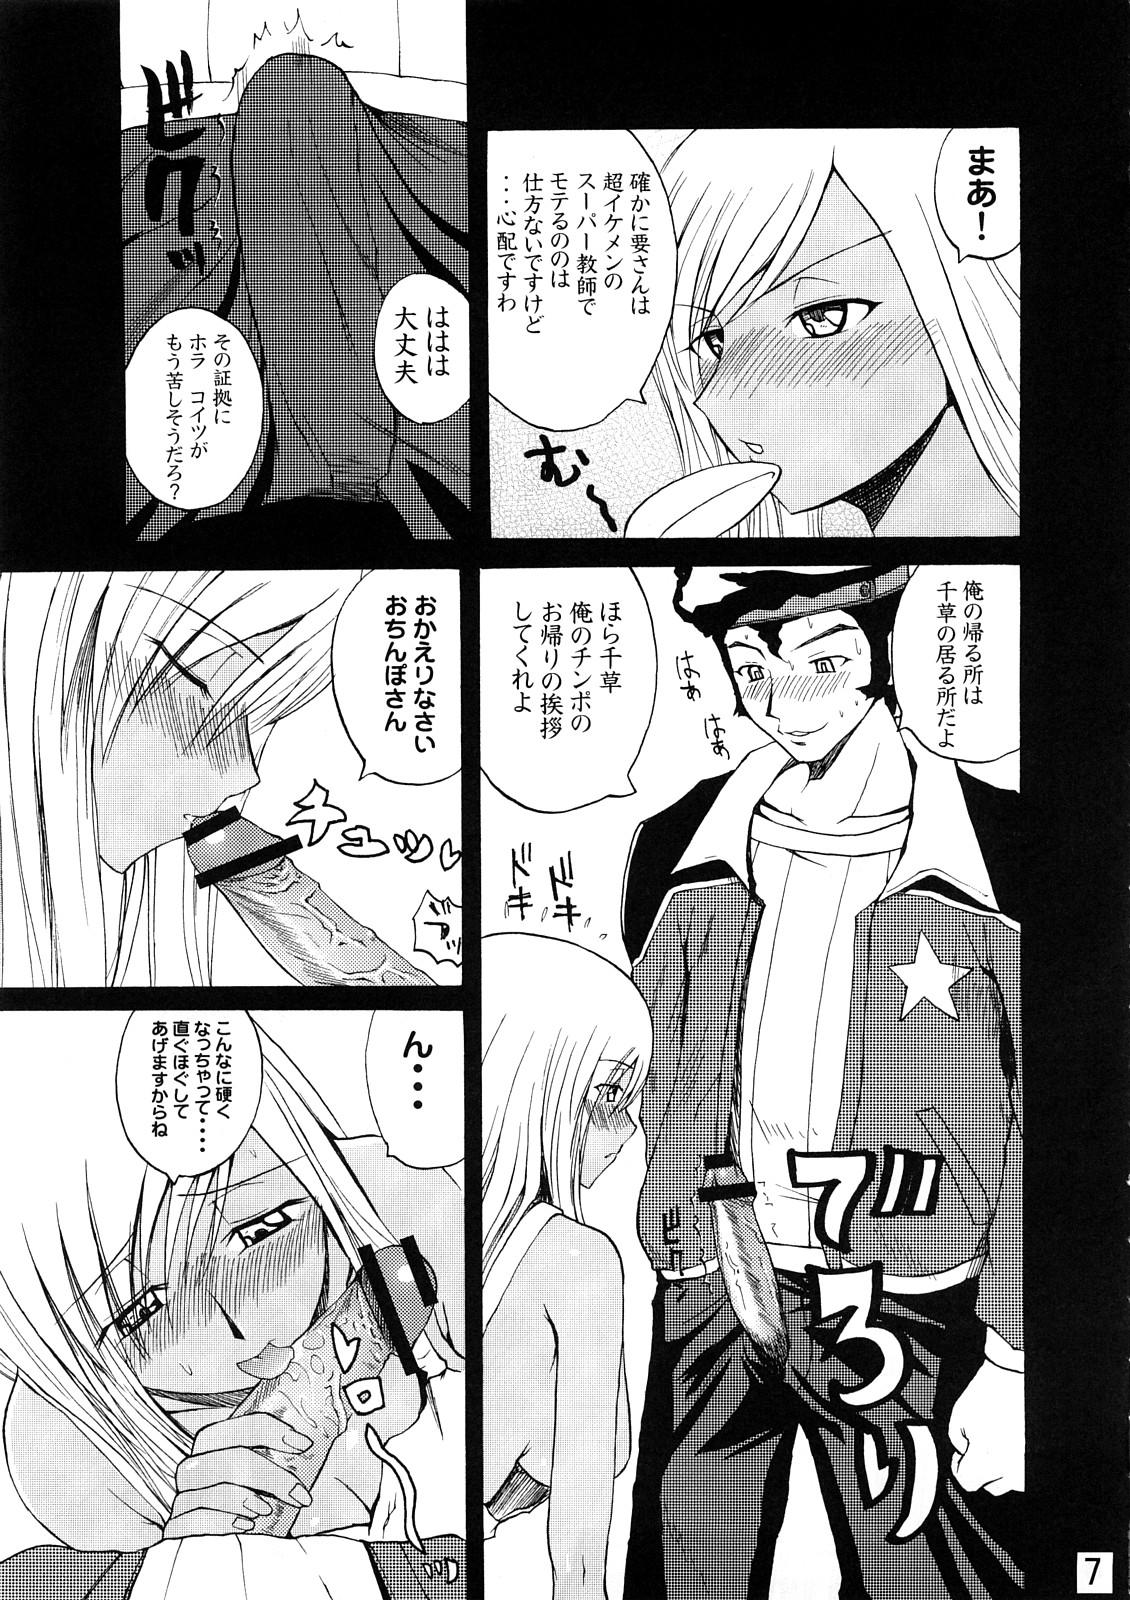 Bisex discord - Code geass Classy - Page 6